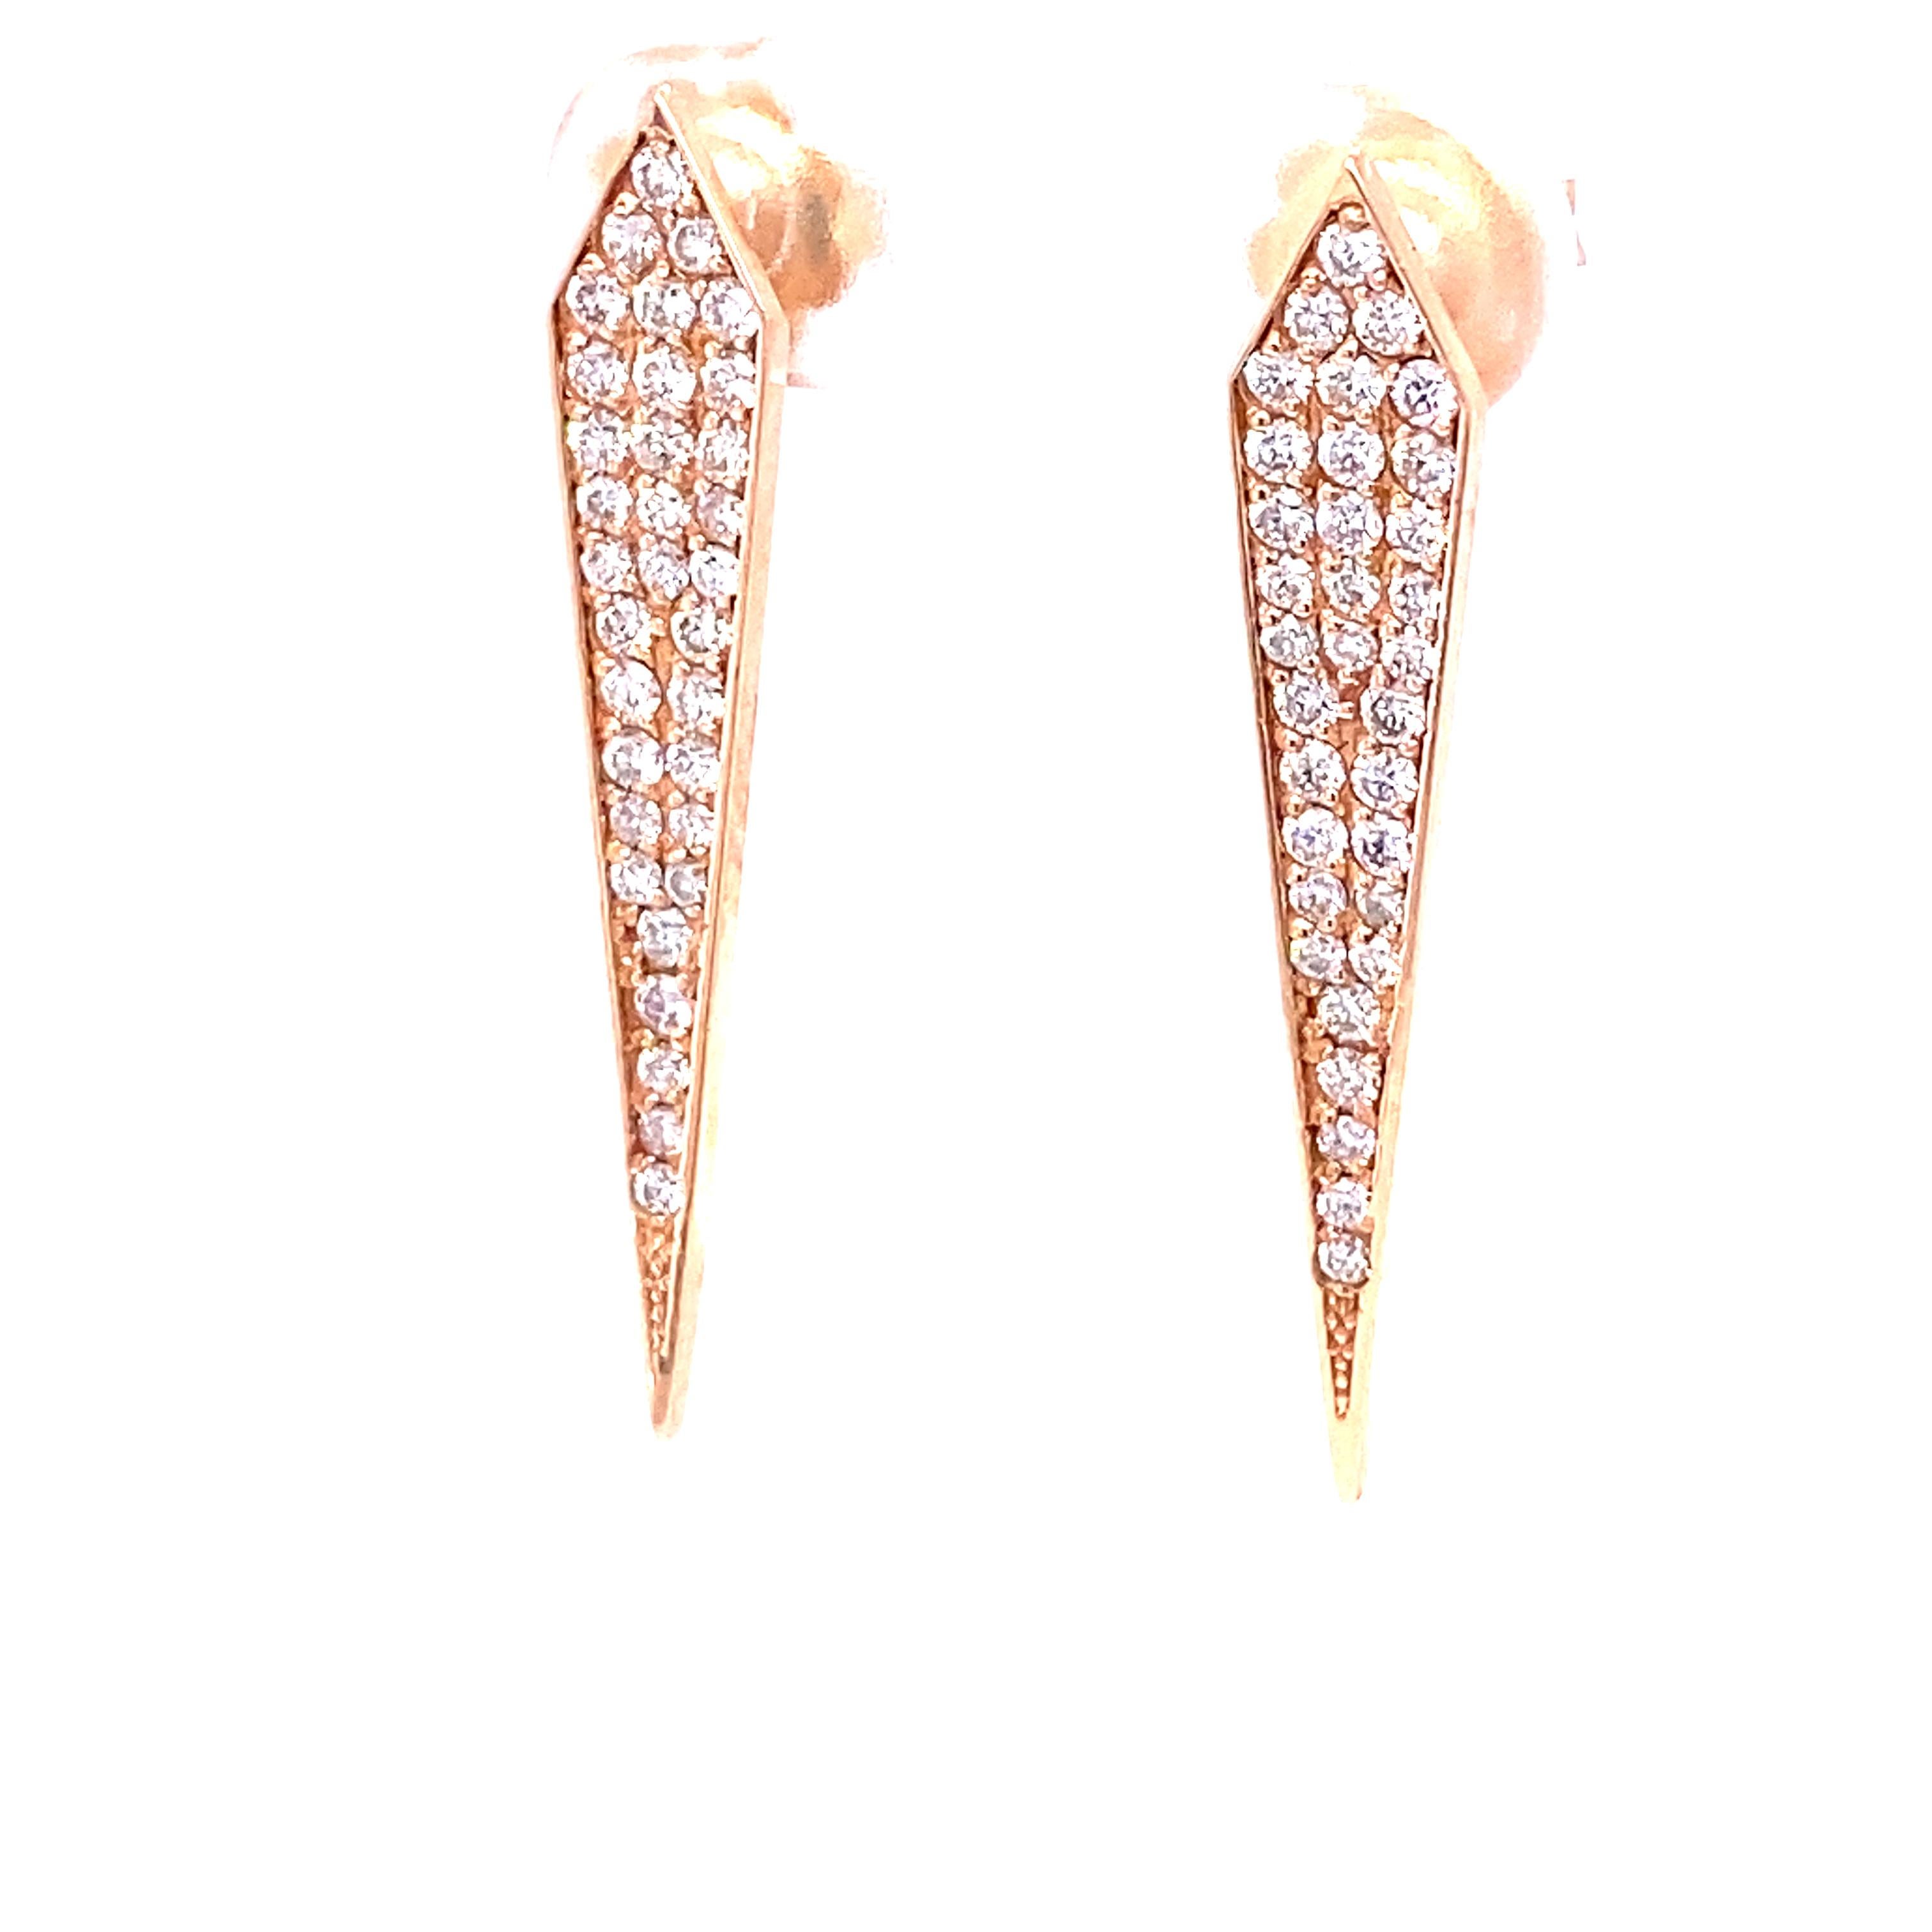 Darling Diamond Dazzlers
These beauties can be worn formally or even casually. 
64 Round Cut Diamonds weighing 0.80 Carats, Clarity: VS, Color: H
14 Karat Rose Gold, 4.9 grams 
Approximately 1.25 inches in length